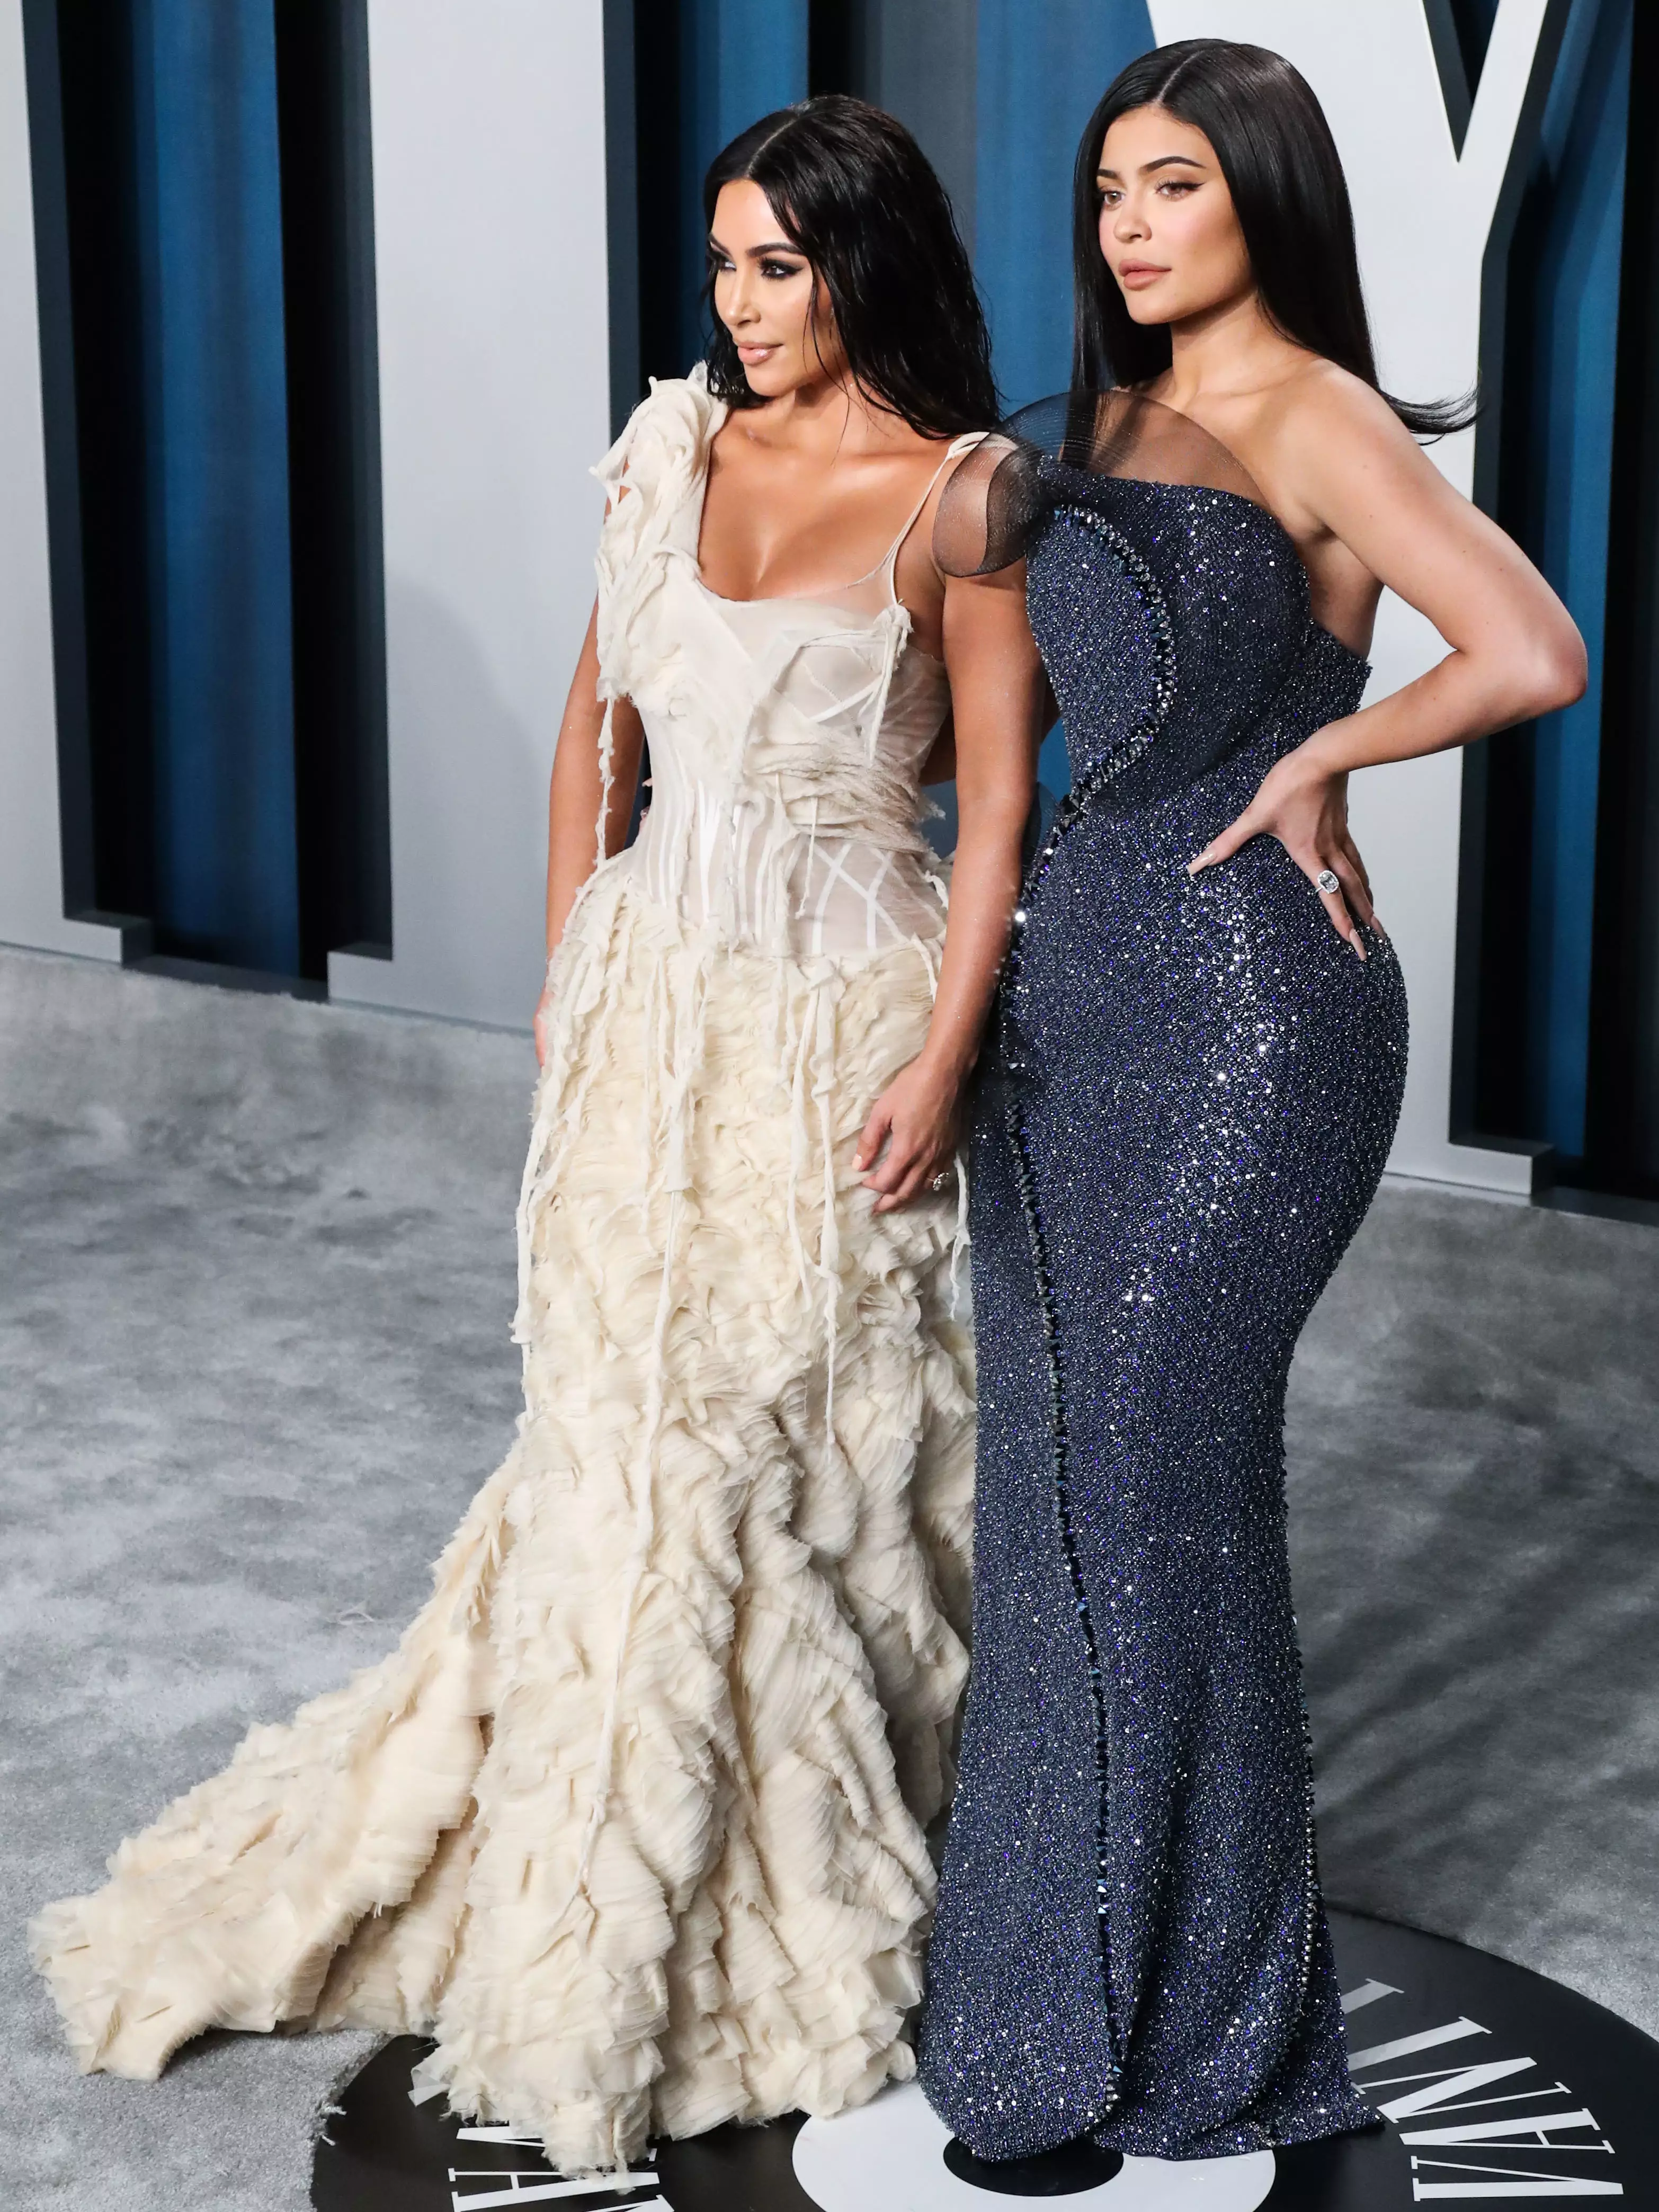 Kylie Jenner (right) with her sister Kim Kardashian West (left).